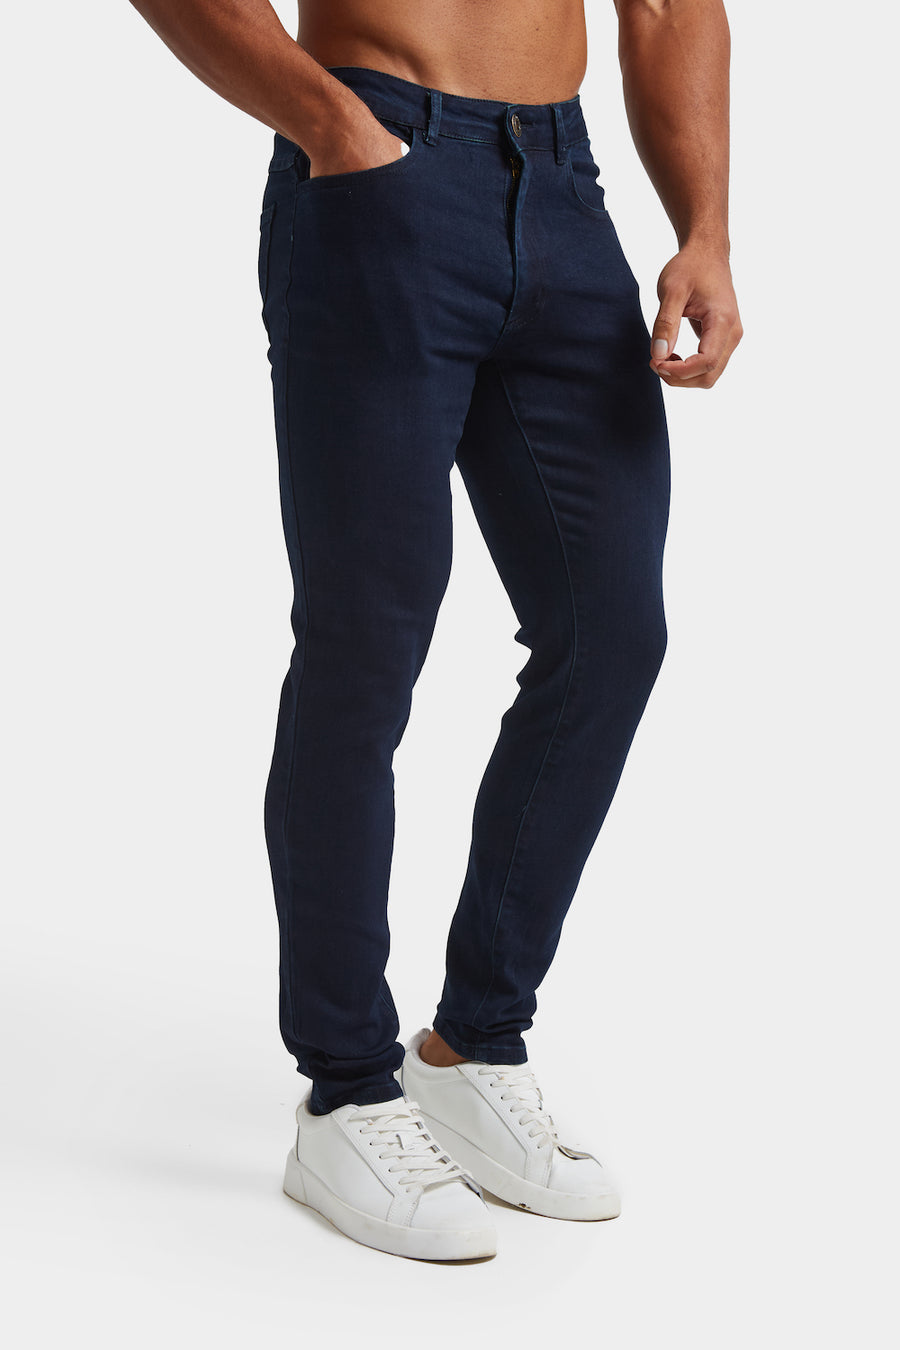 Athletic Fit Jeans in Mid Blue - TAILORED ATHLETE - USA